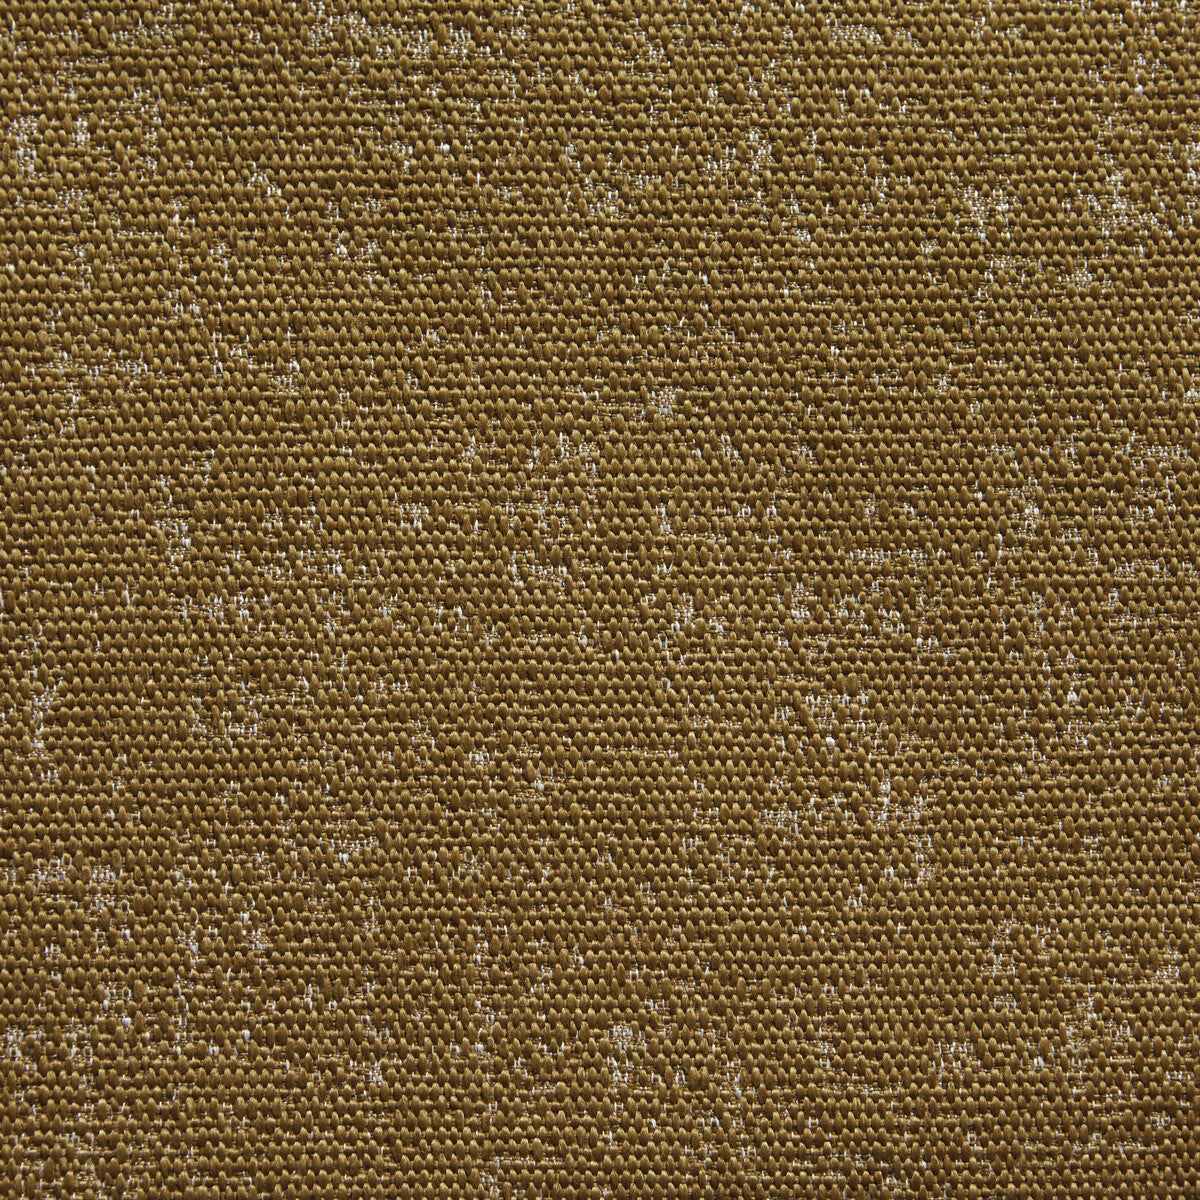 Suquet fabric in 5 color - pattern LZ-30401.05.0 - by Kravet Design in the Lizzo Indoor/Outdoor collection